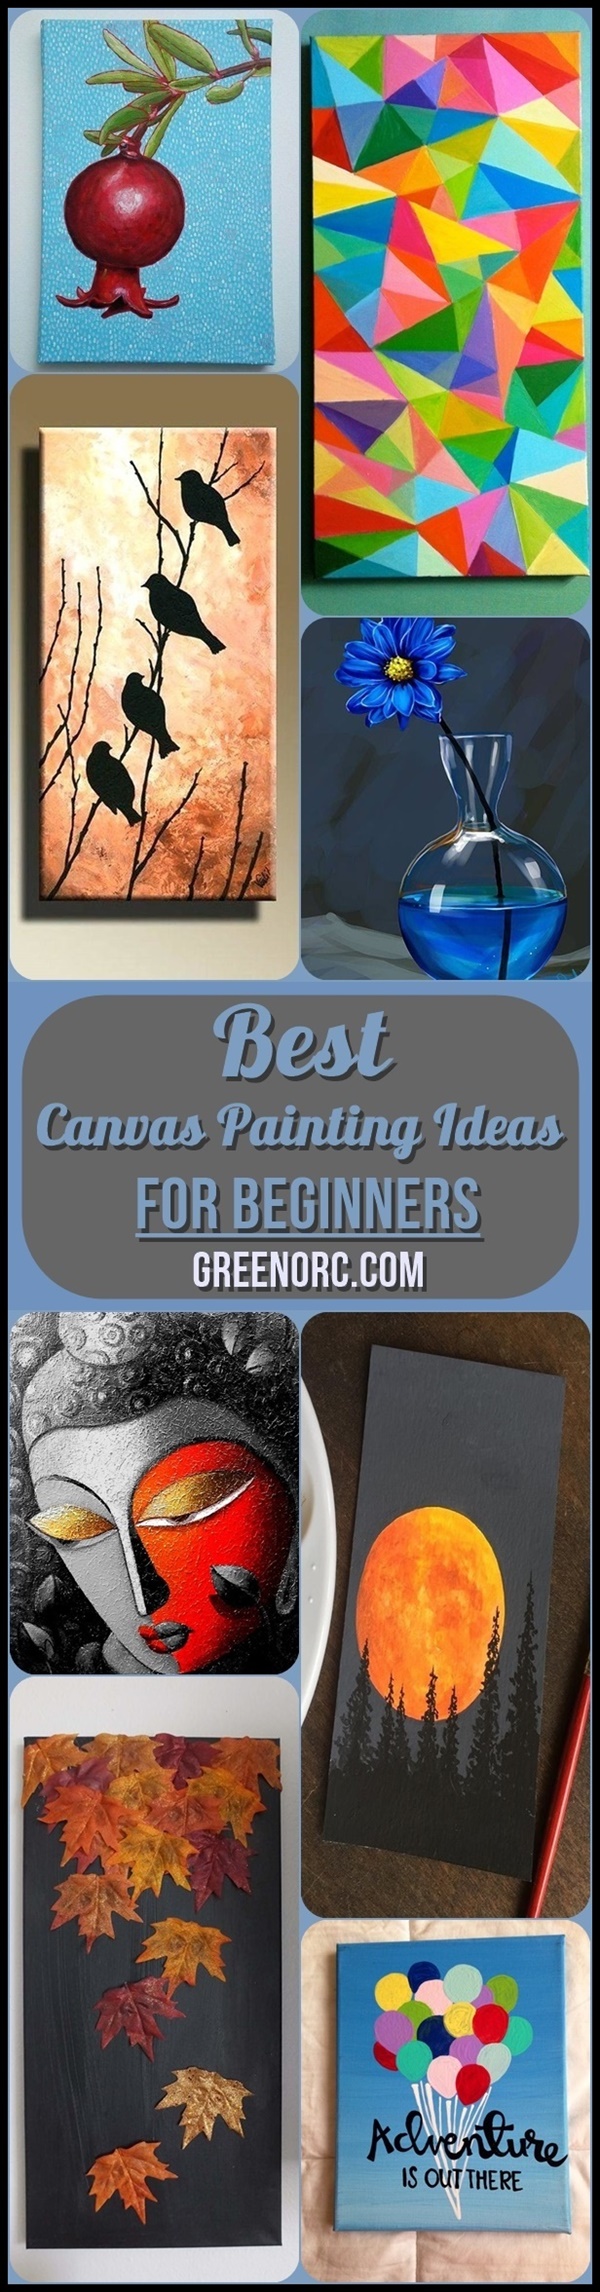 Best Canvas Painting Ideas For Beginners